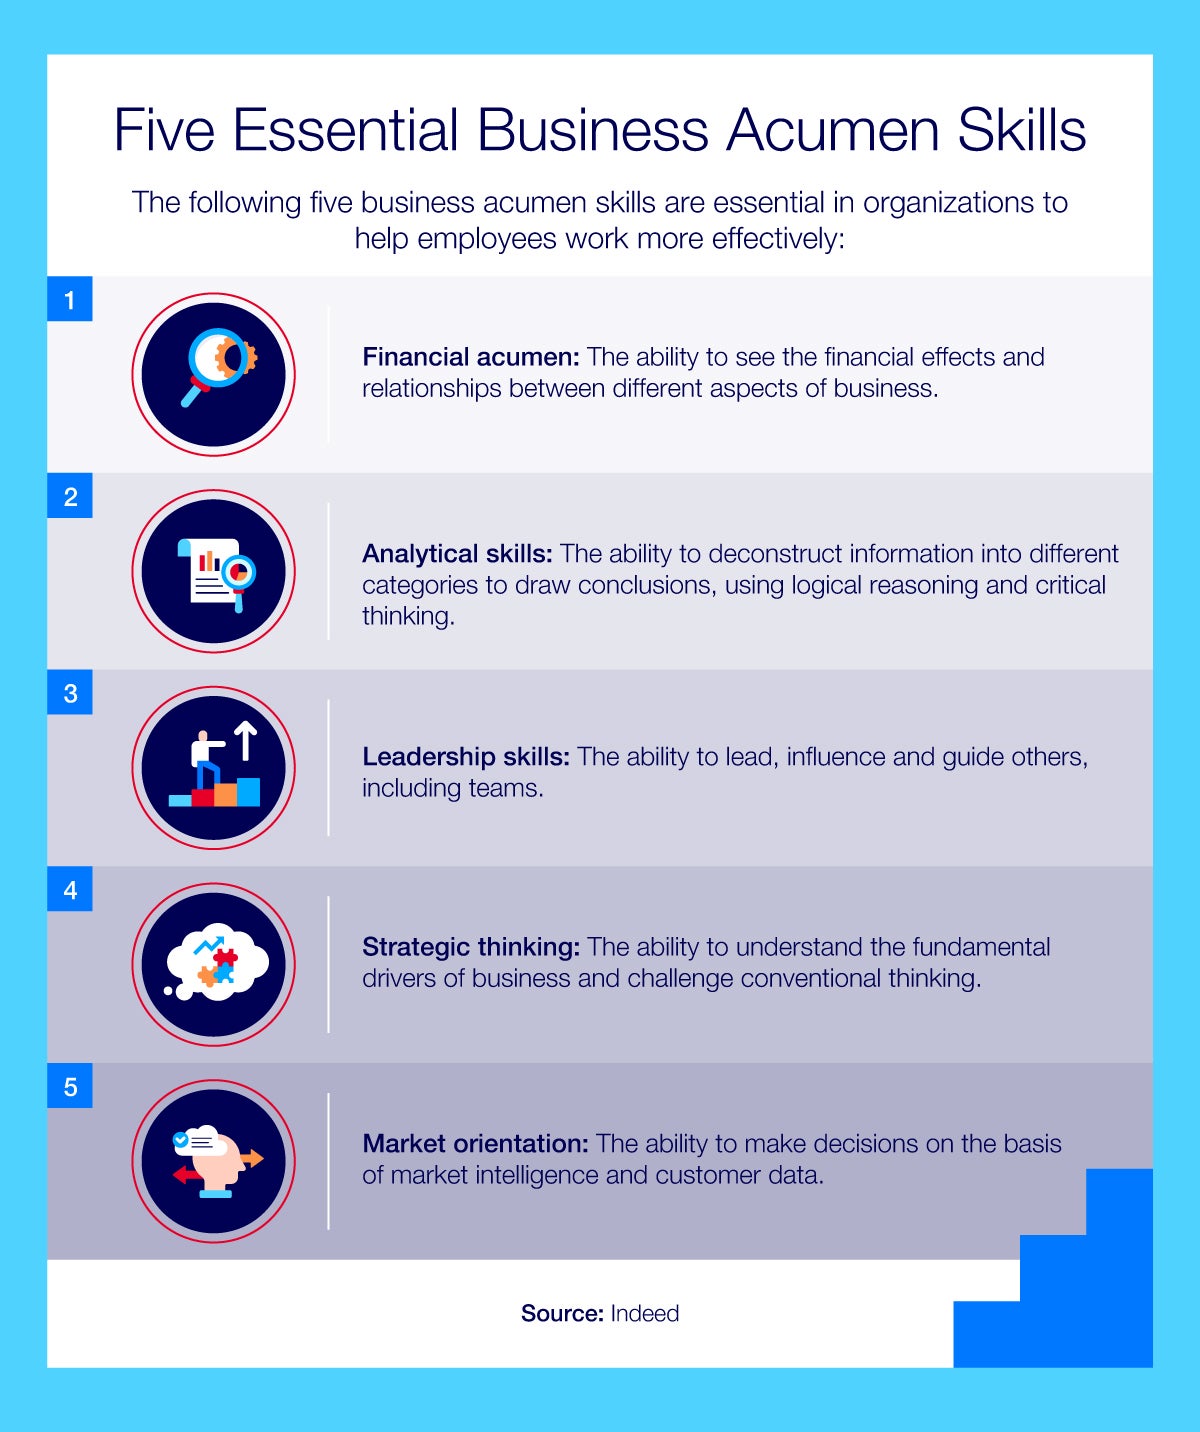 The five essential business acumen skills in numerical list form, with an icon representing each skill to the left of each item.